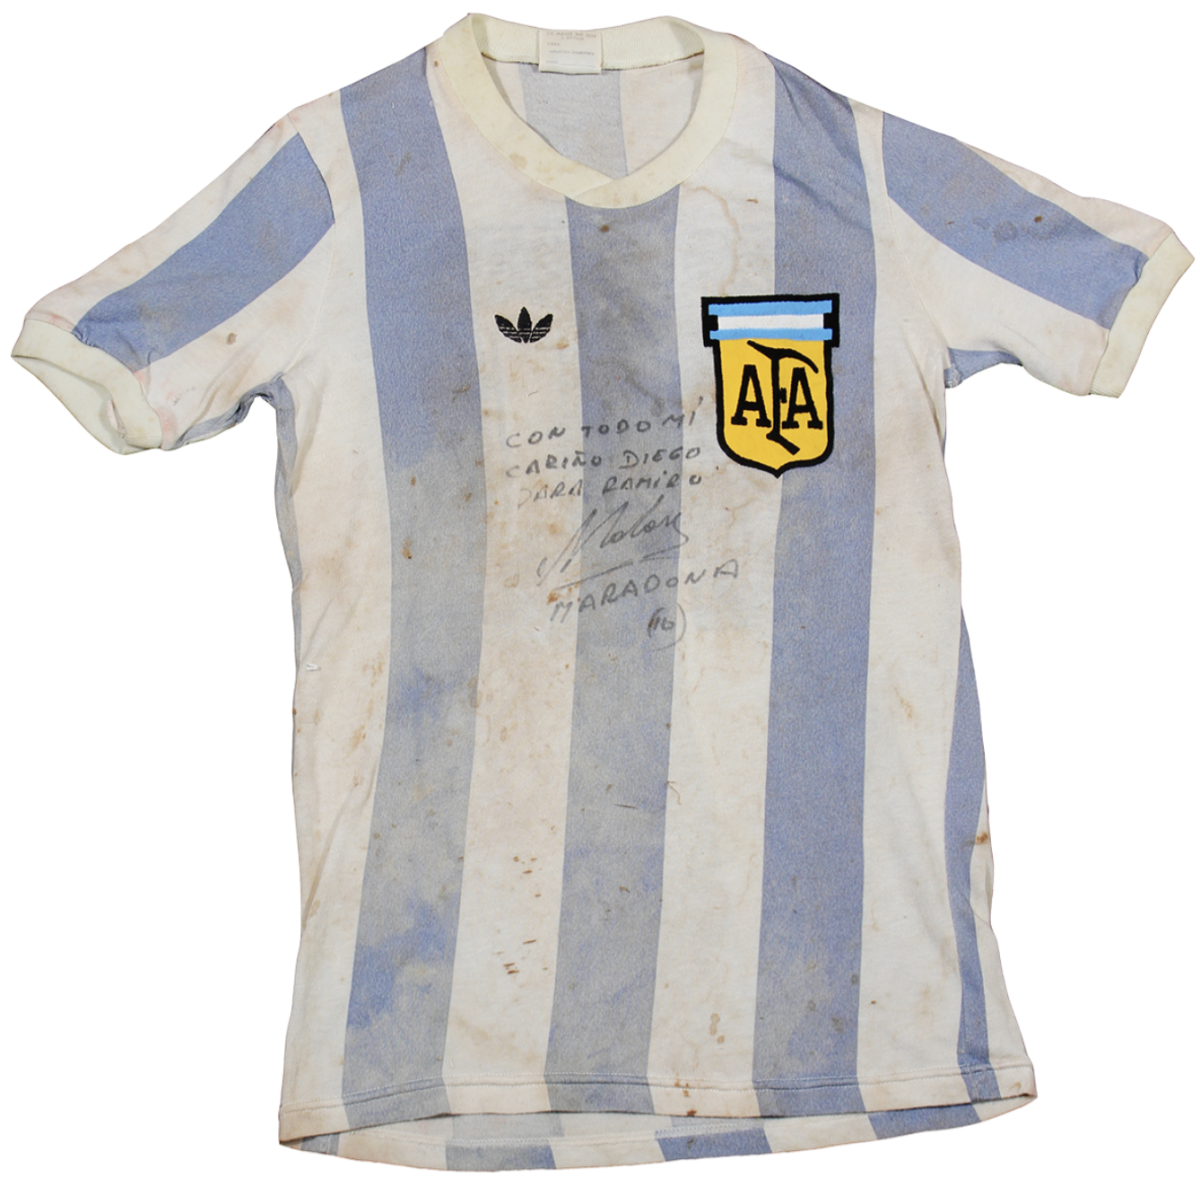 Diego Maradona signed, game-worn jersey from the 1979 World Youth Cup.